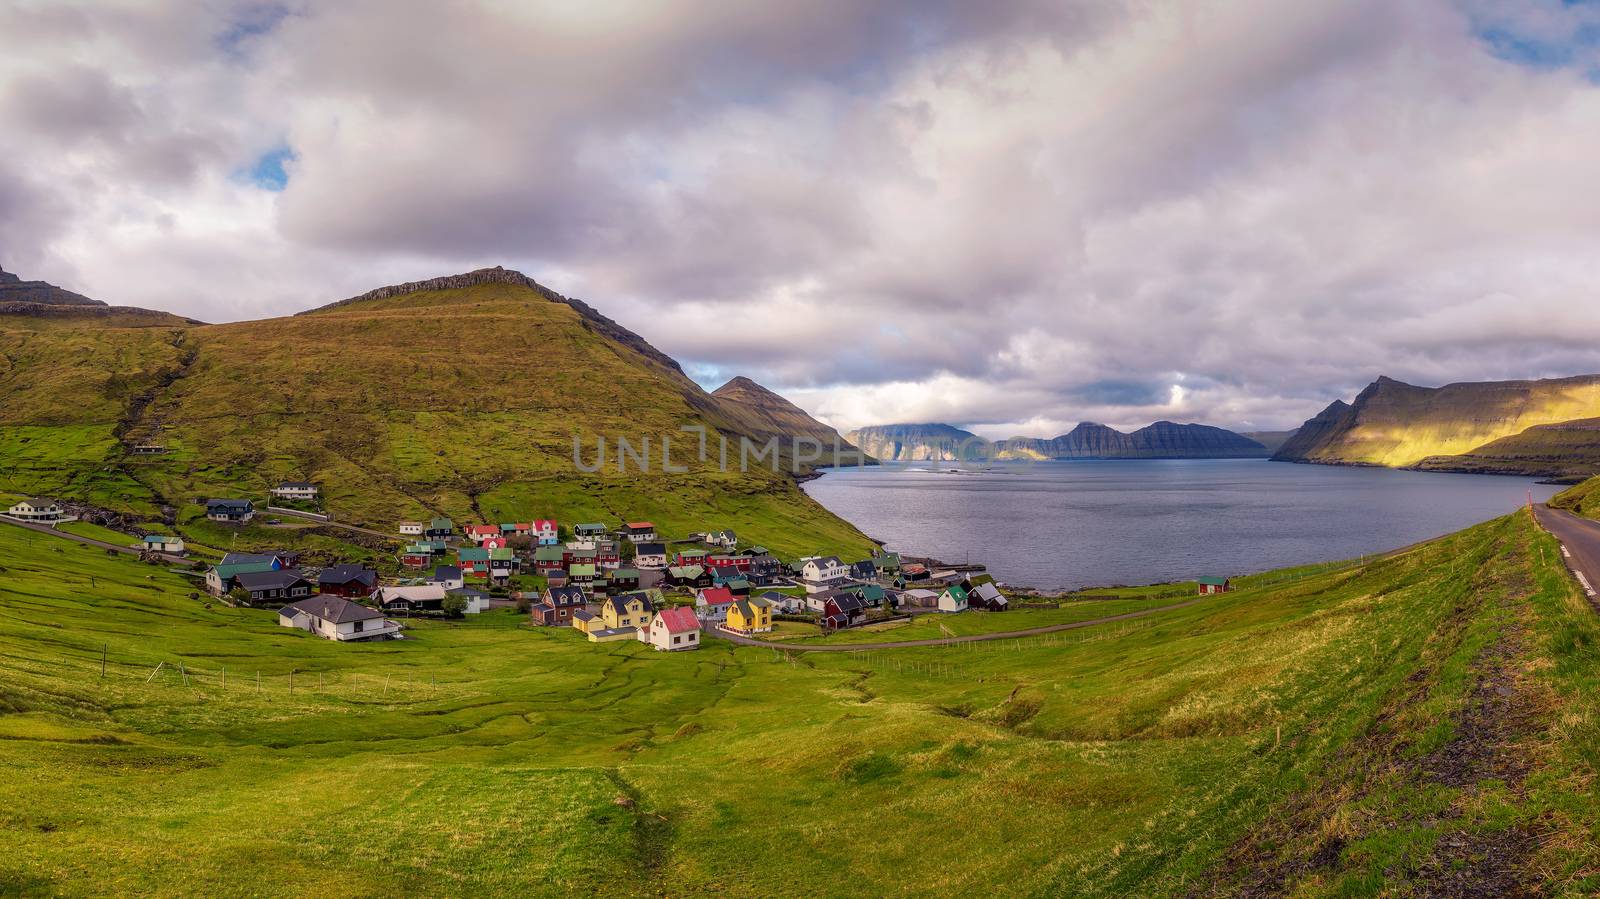 Panorama of mountains and ocean around village of Funningur on Faroe Islands by nickfox